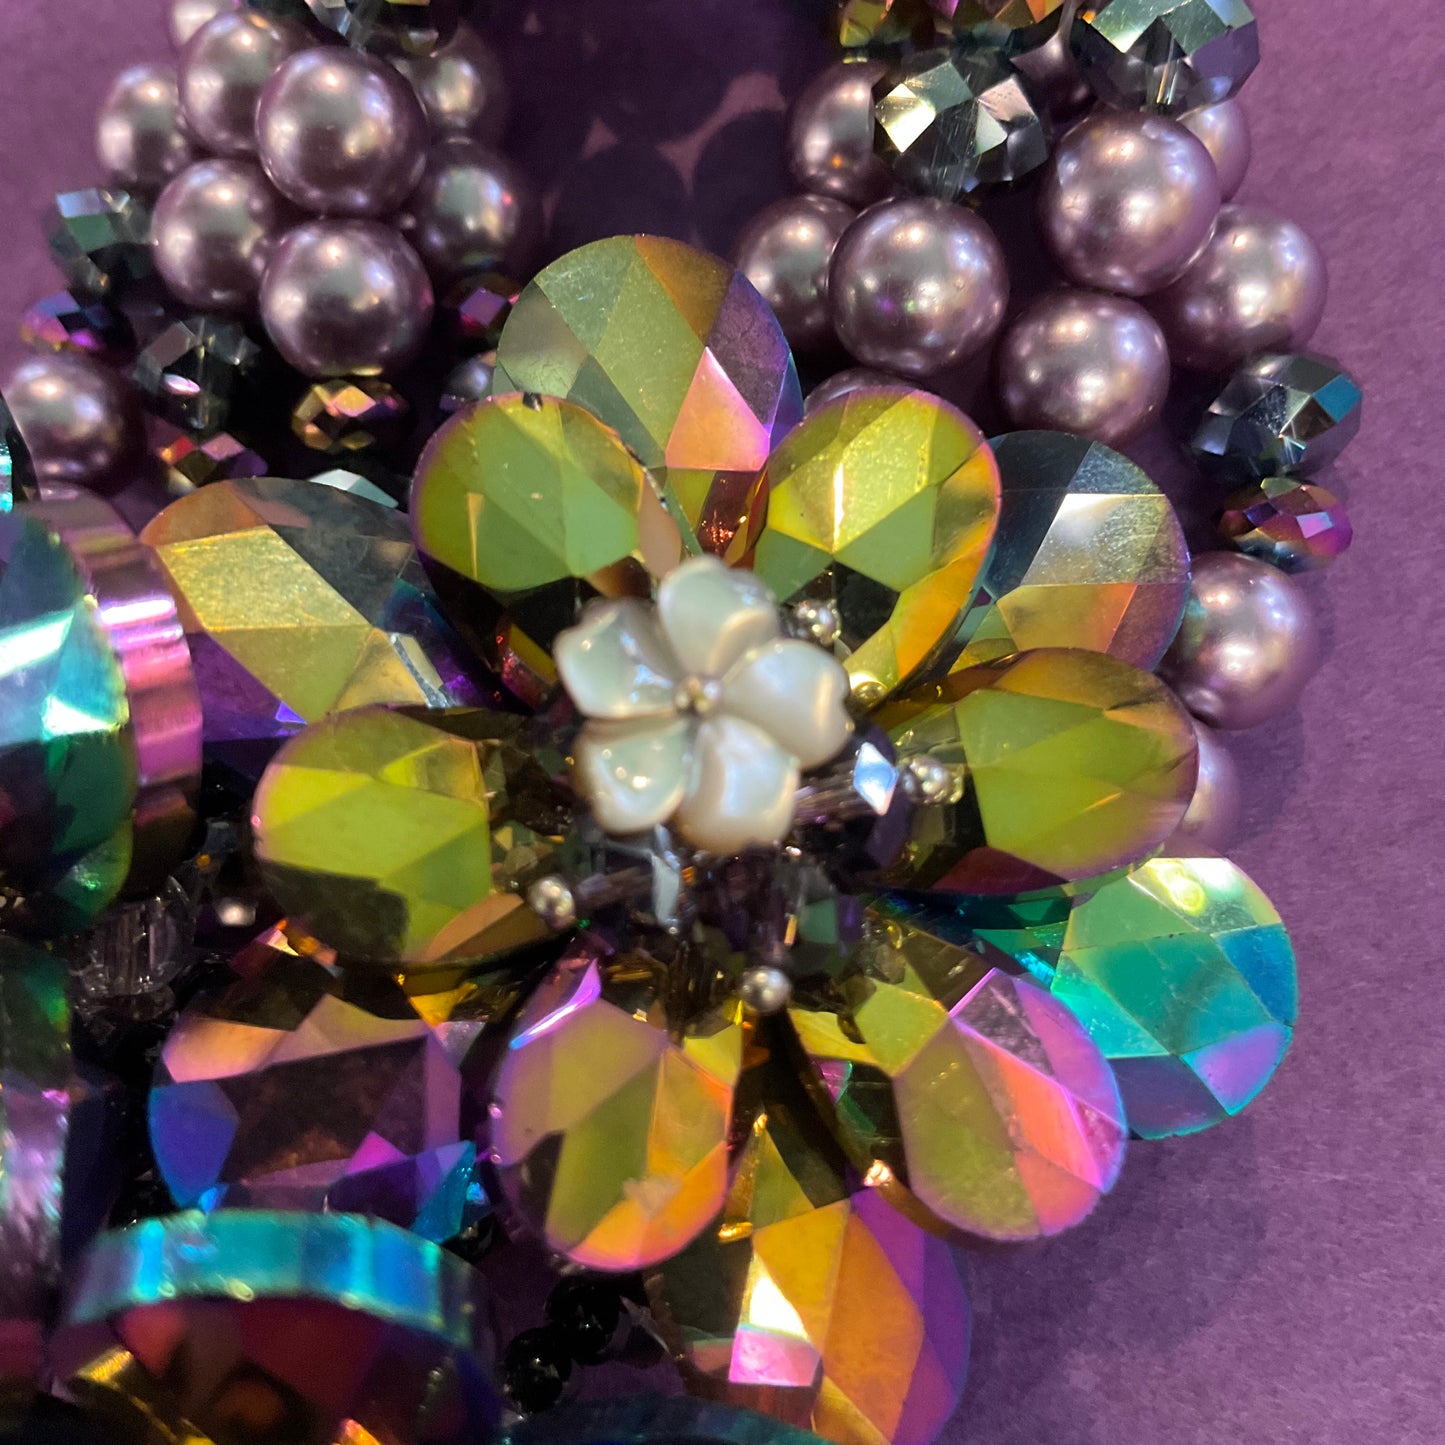 Vintage Statement Butler and Wilson Purple/rainbow faceted crystal and faux pearl beaded flower bracelet